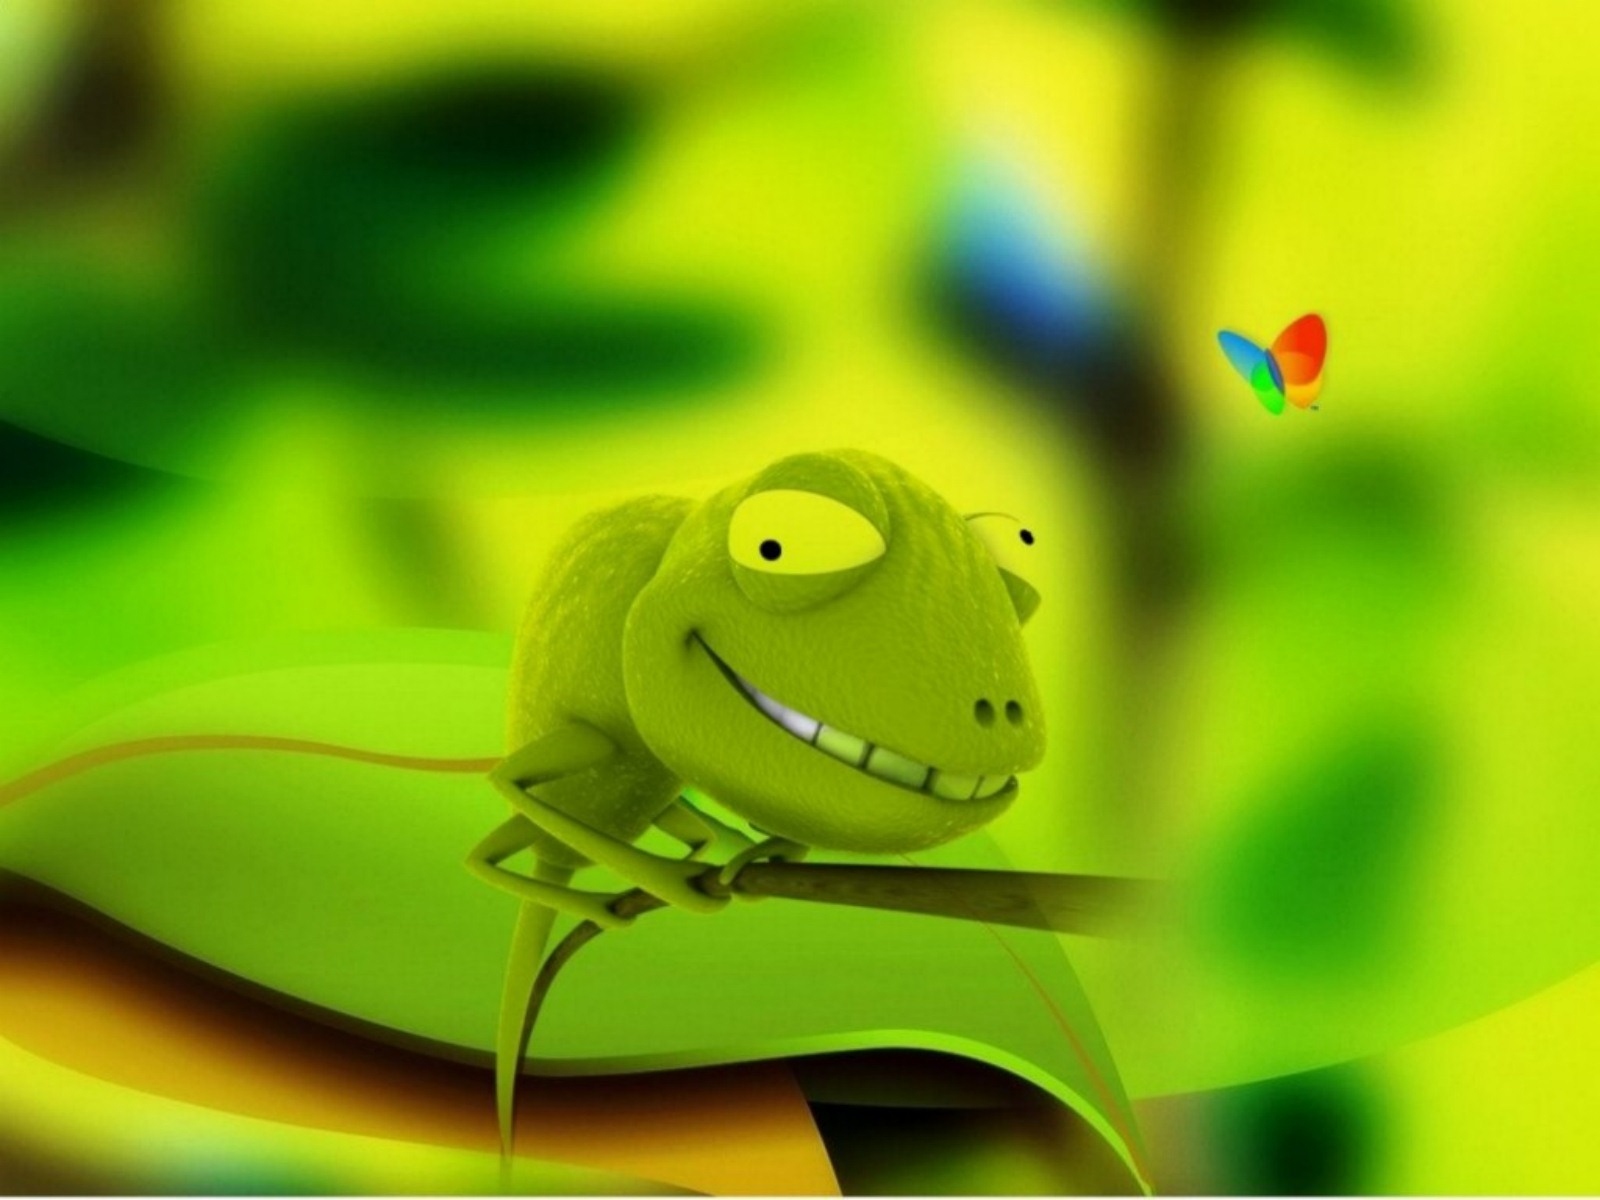 Reptile Suse Linux Wallpaper Funny Zoo